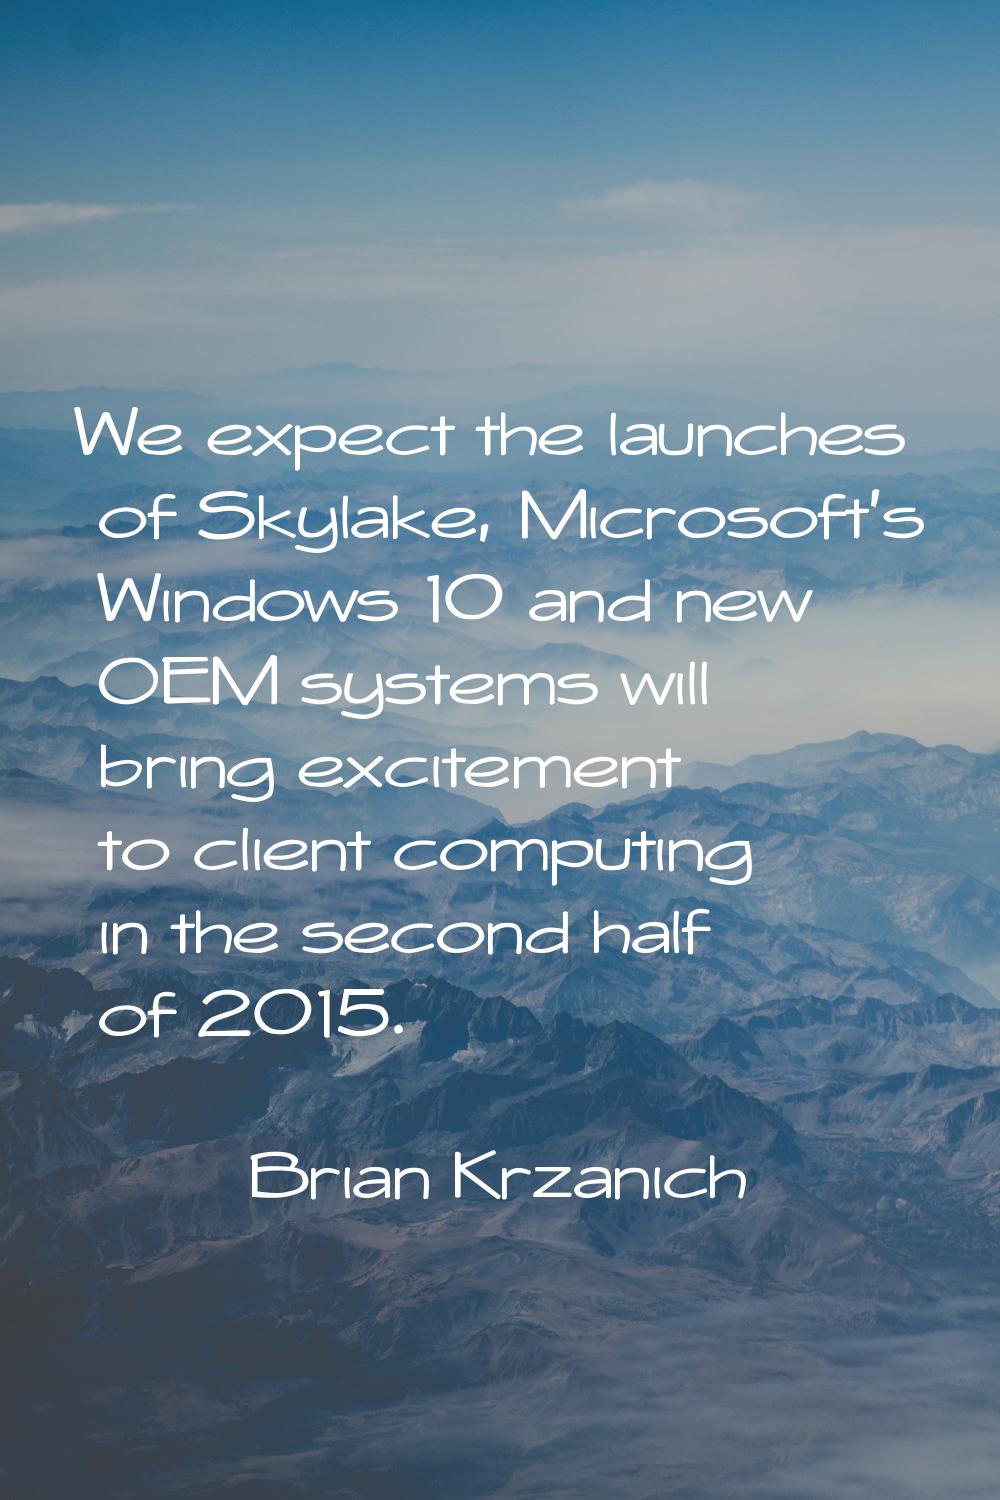 We expect the launches of Skylake, Microsoft's Windows 10 and new OEM systems will bring excitement